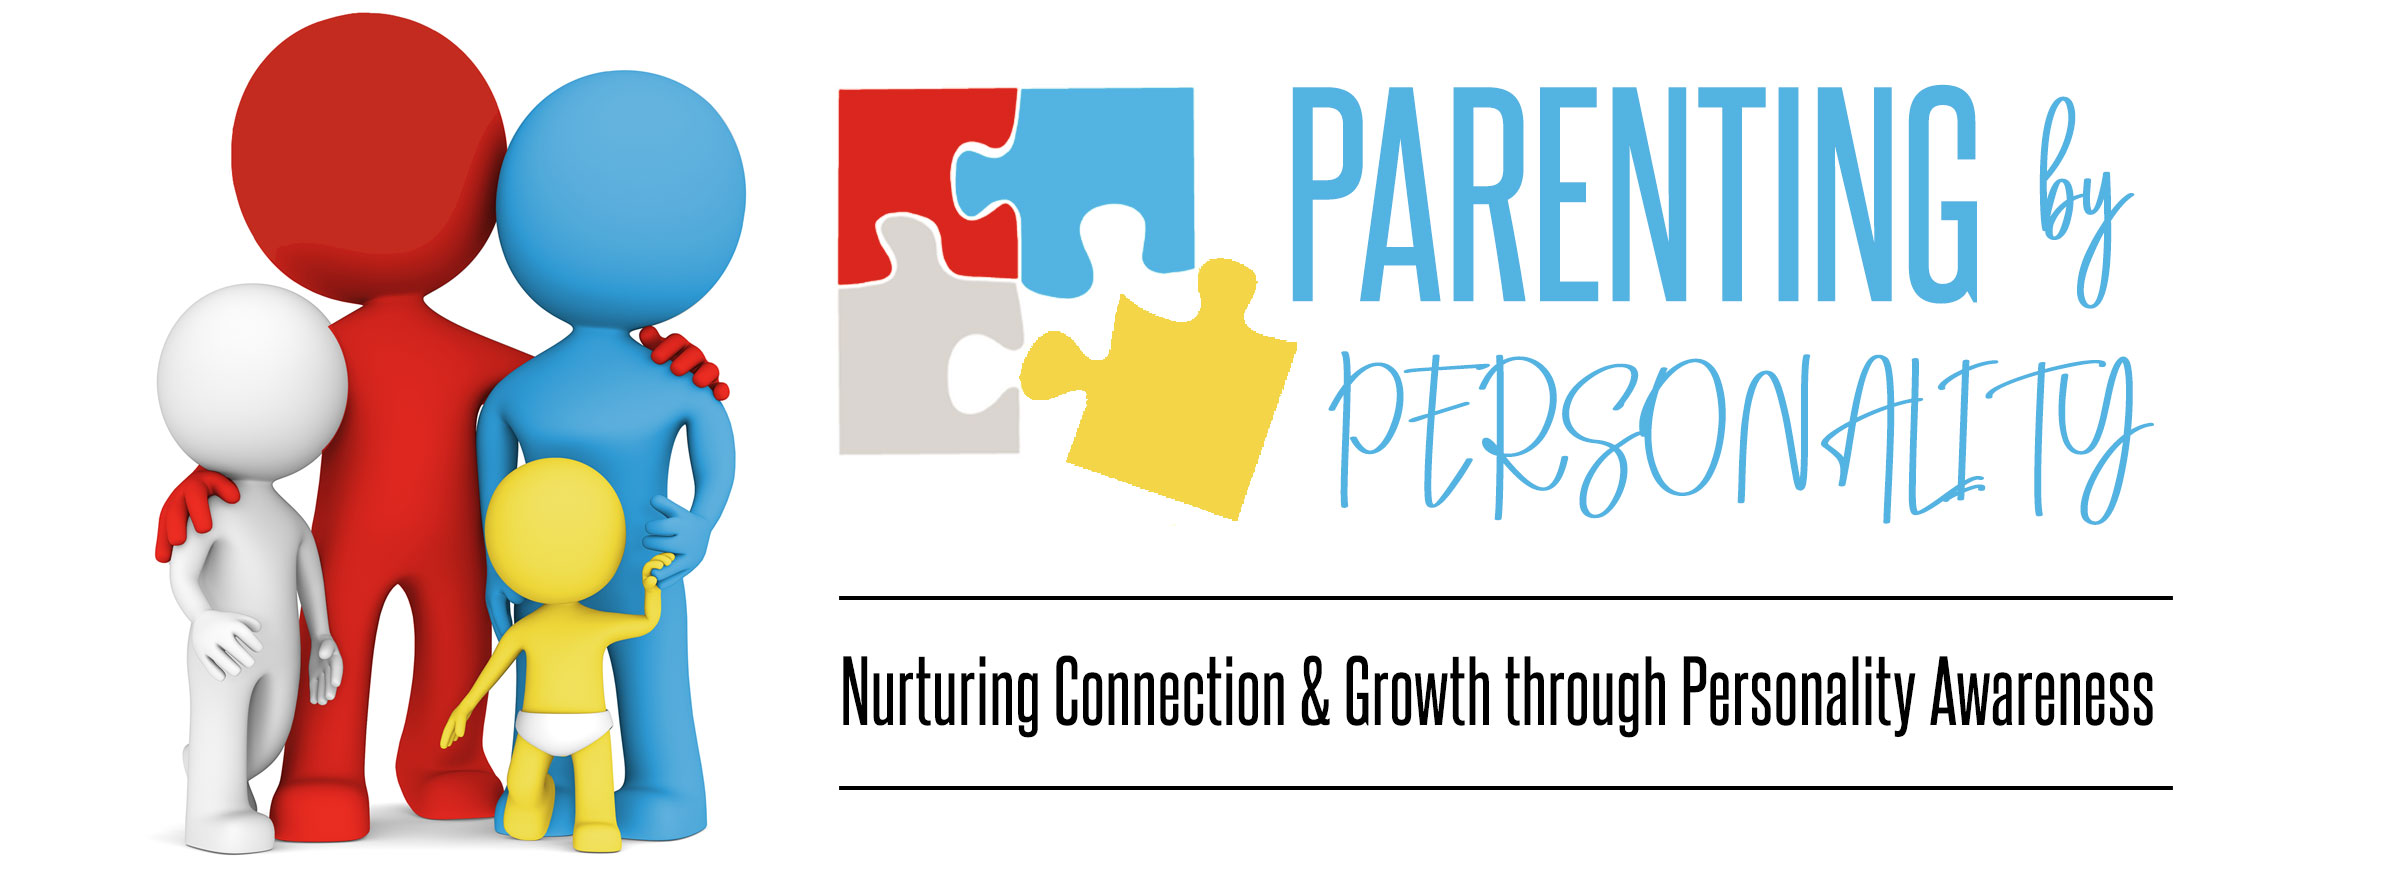 Parenting by Personality - Nurturing Connection & Growth through Personality Awareness